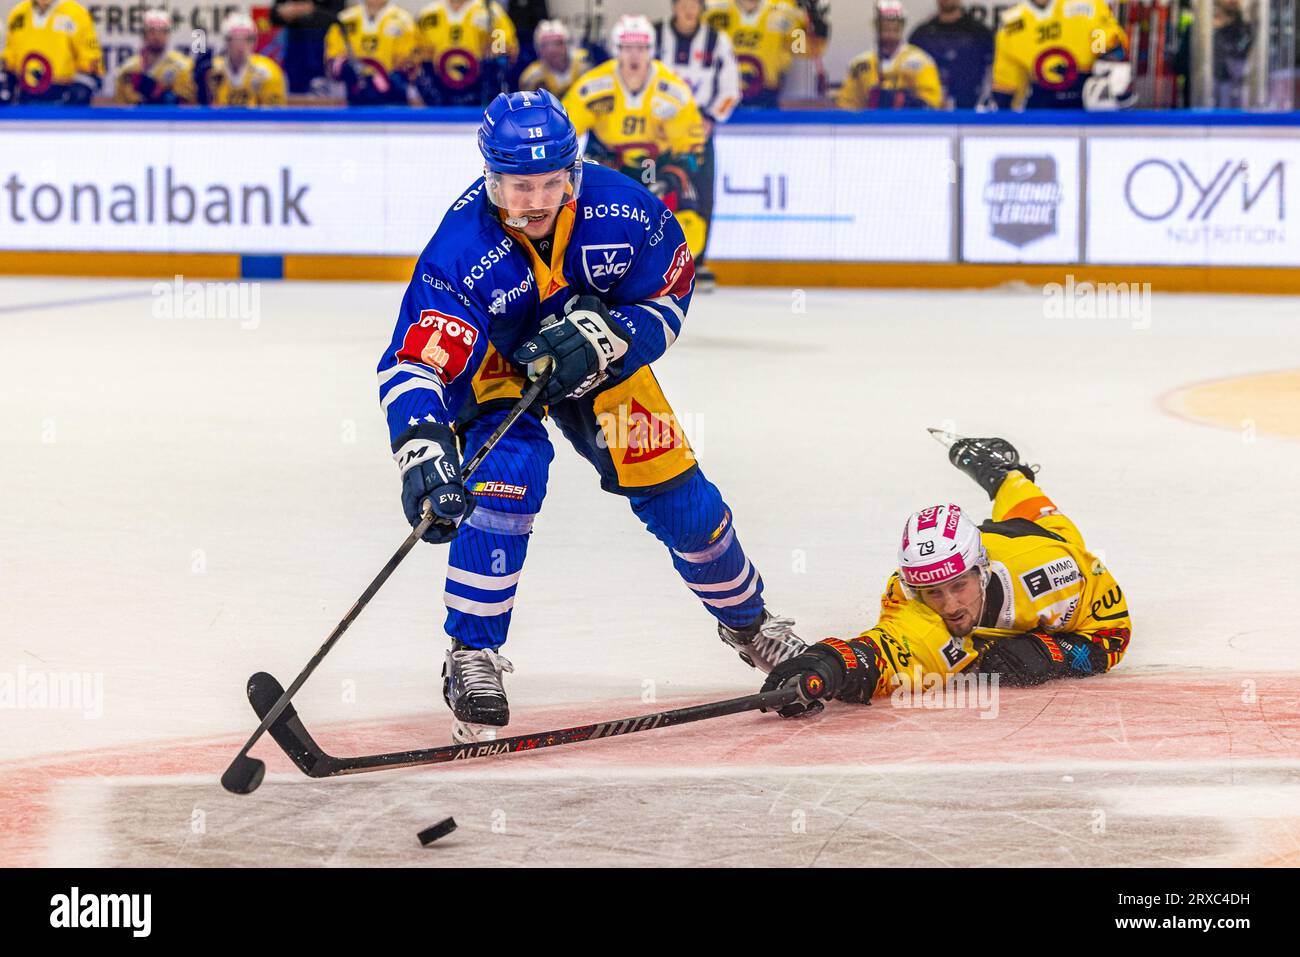 Thierry Bader #79 (SC Bern) throws everything into the duel with Niklas Hansson #19 (EV Zug) during the National League Regular Season ice hockey game between EV Zug and SC Bern on